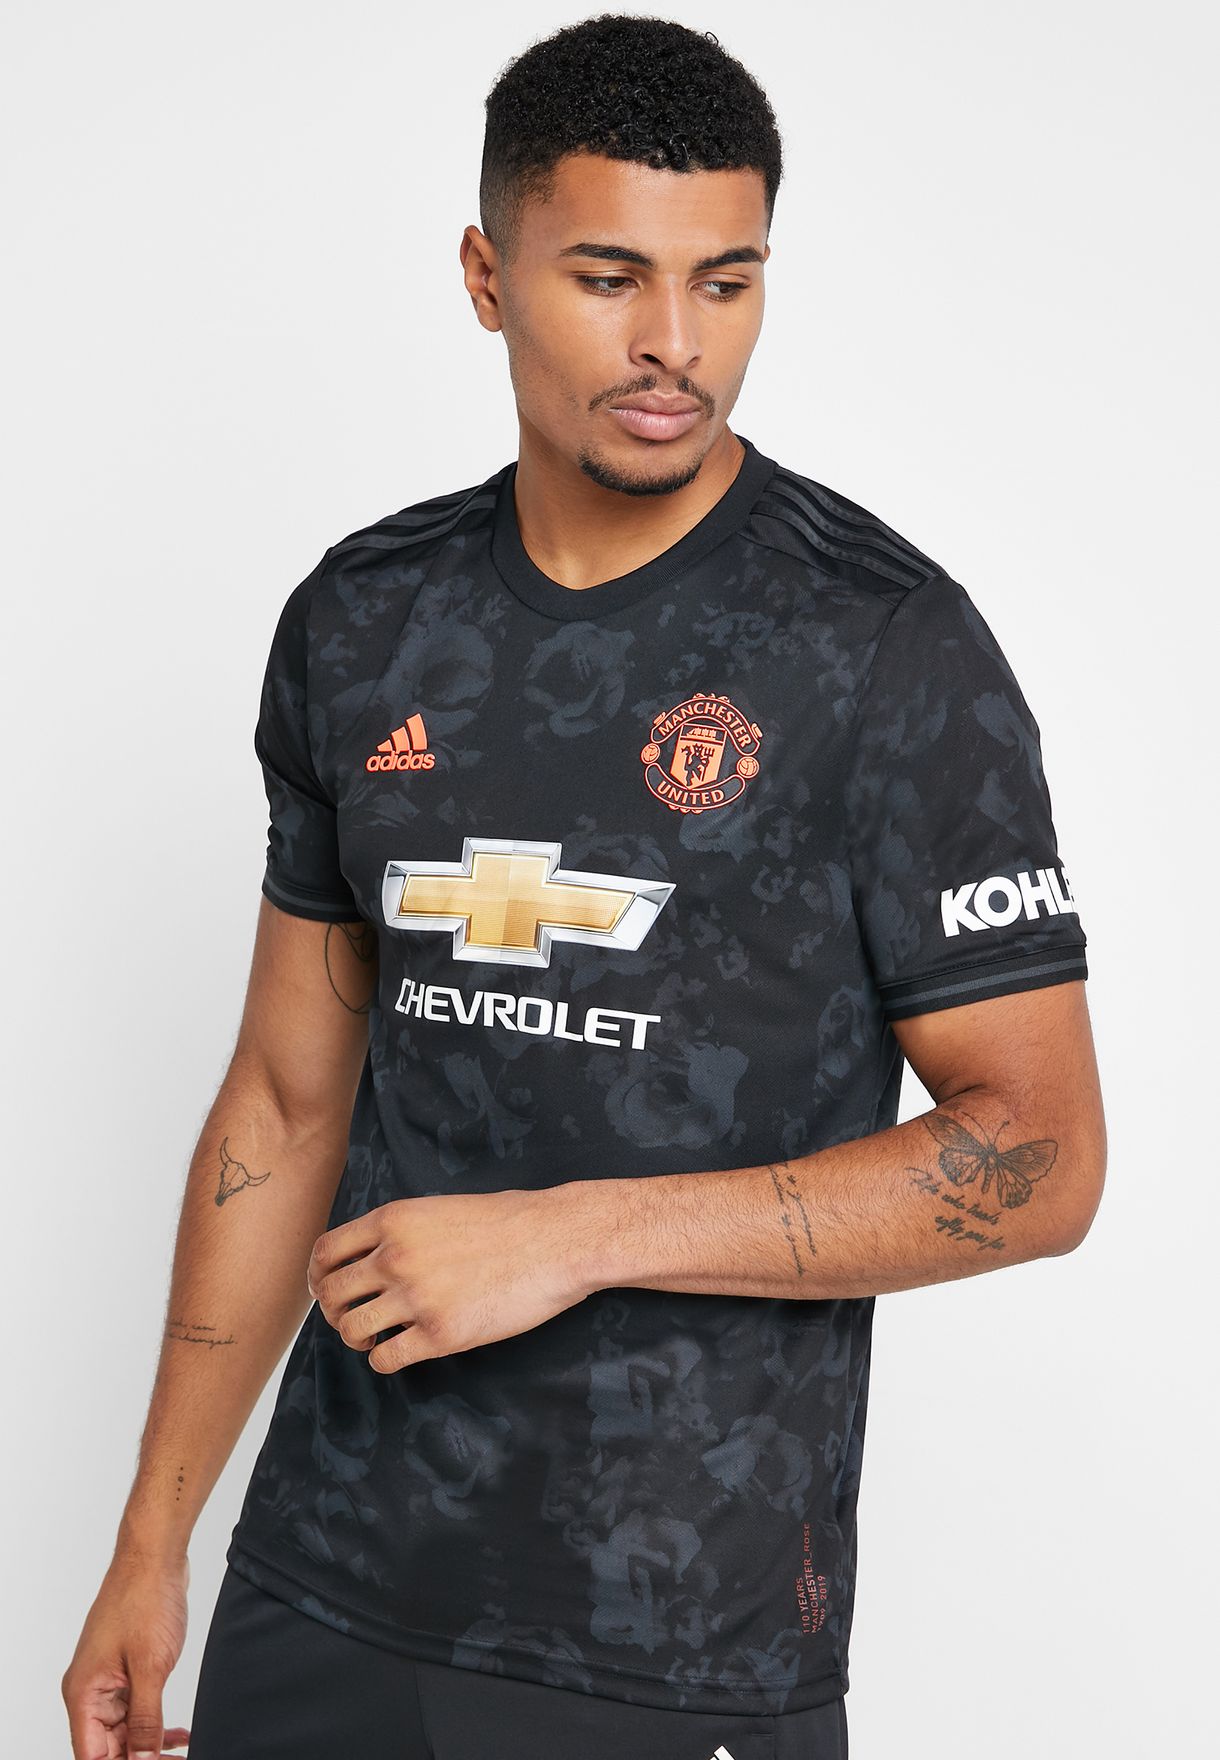 Manchester United Jersey 19/20 : Related:manchester united jersey 19/20 ...